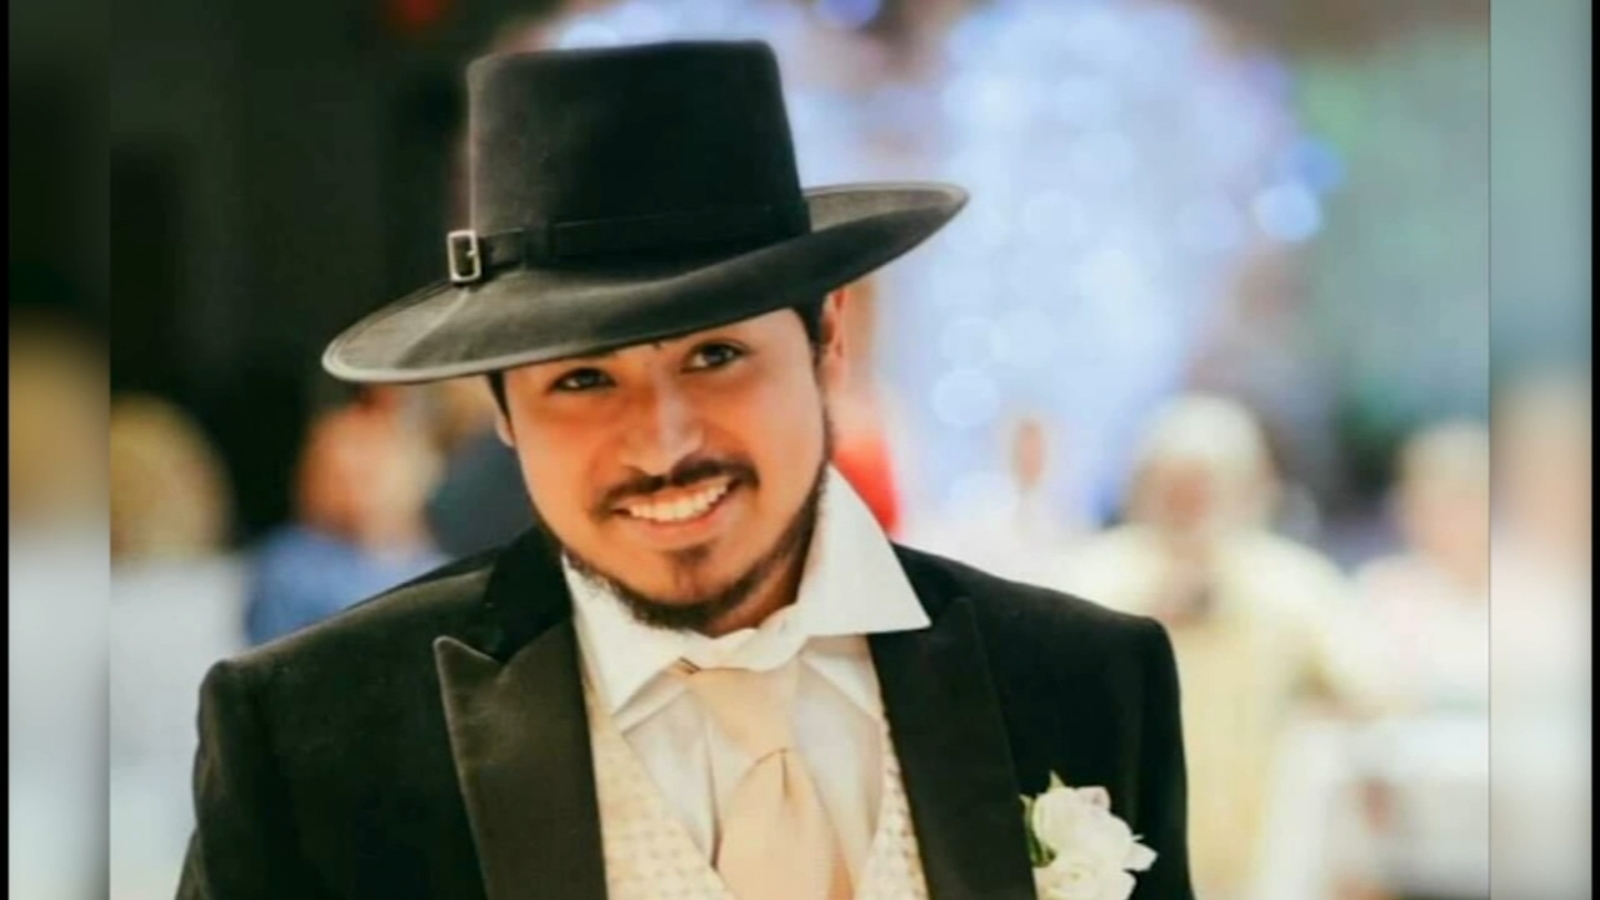 Pasadena shooting death: Jesse Davila’s family looks for answers after he was found dead in his mother’s car near Spencer Highway [Video]